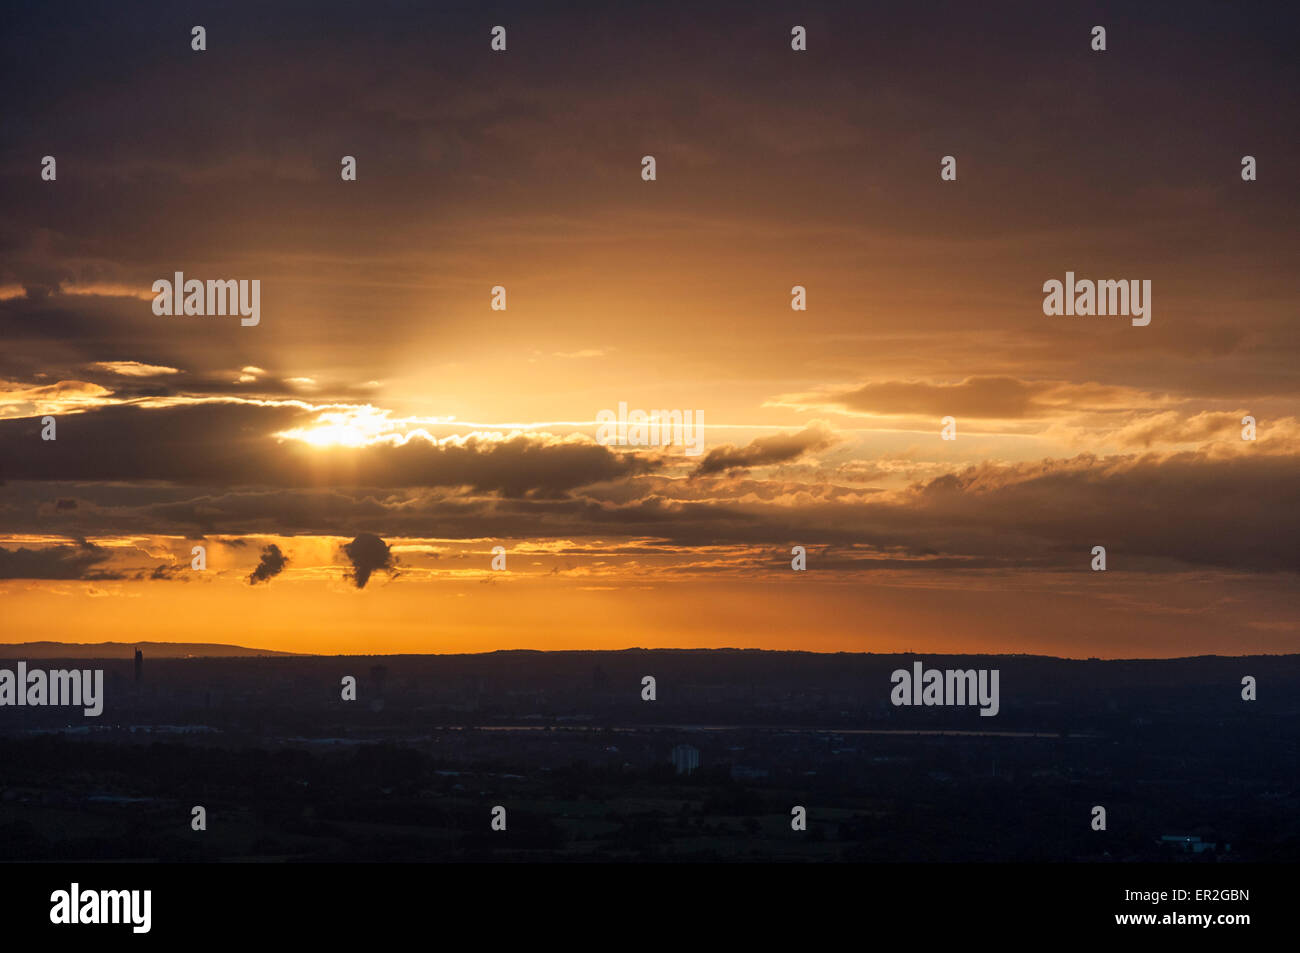 Dramatic sunset over the city of Manchester as seen from the hills of North Derbyshire. Stock Photo